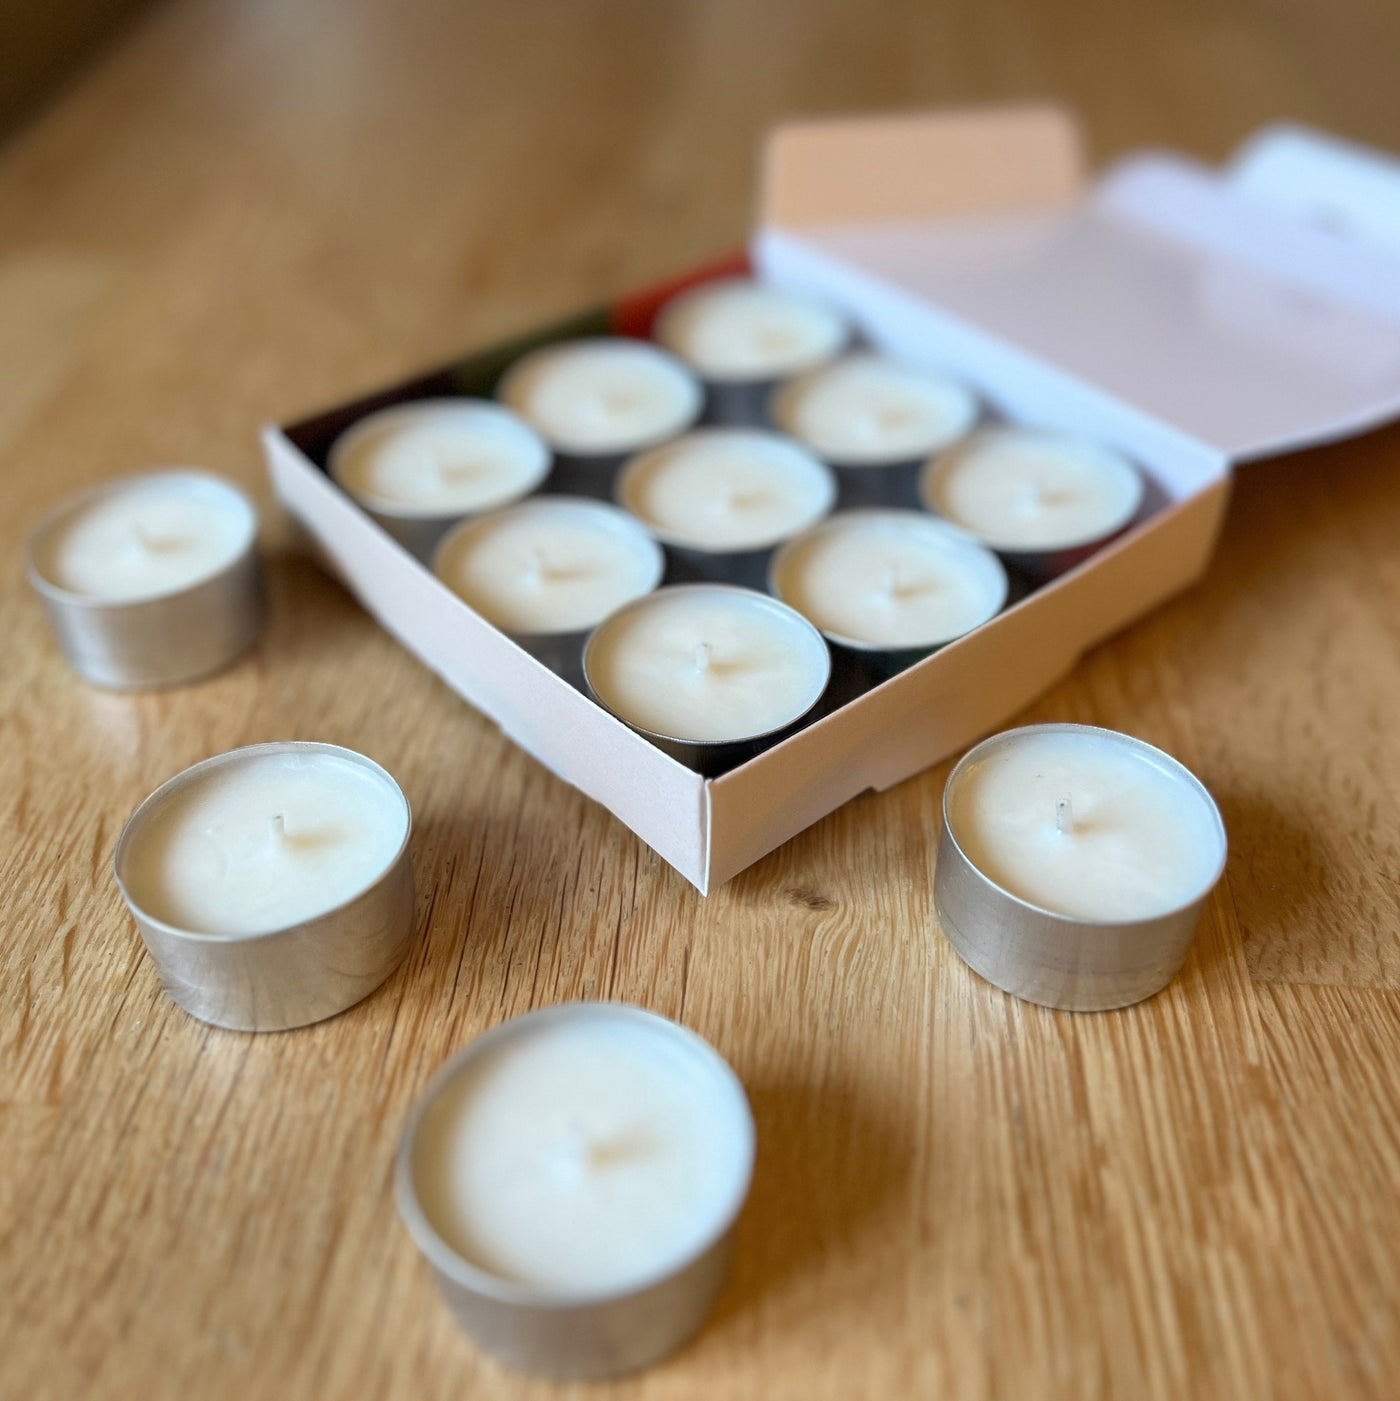 Our autumn candle collection brings a trio of cosy seasonal scents into your home with our 9 tealights. Hand poured in England using sustainable plant-based wax.